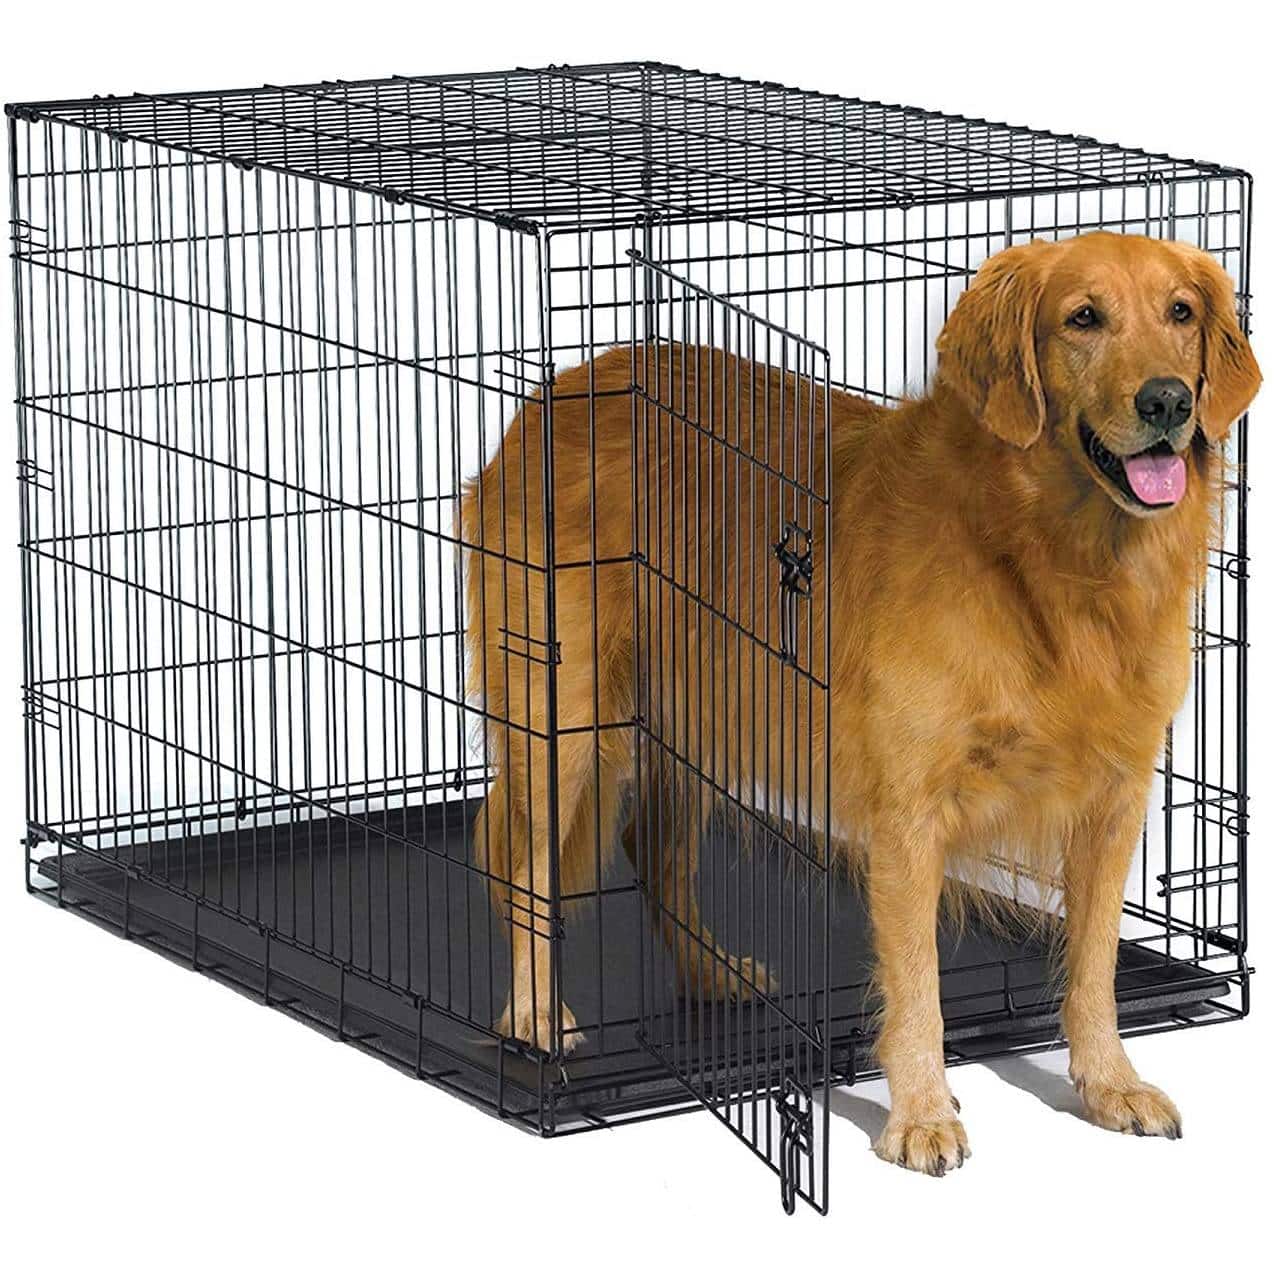 New World Metal Dog Crate (1)